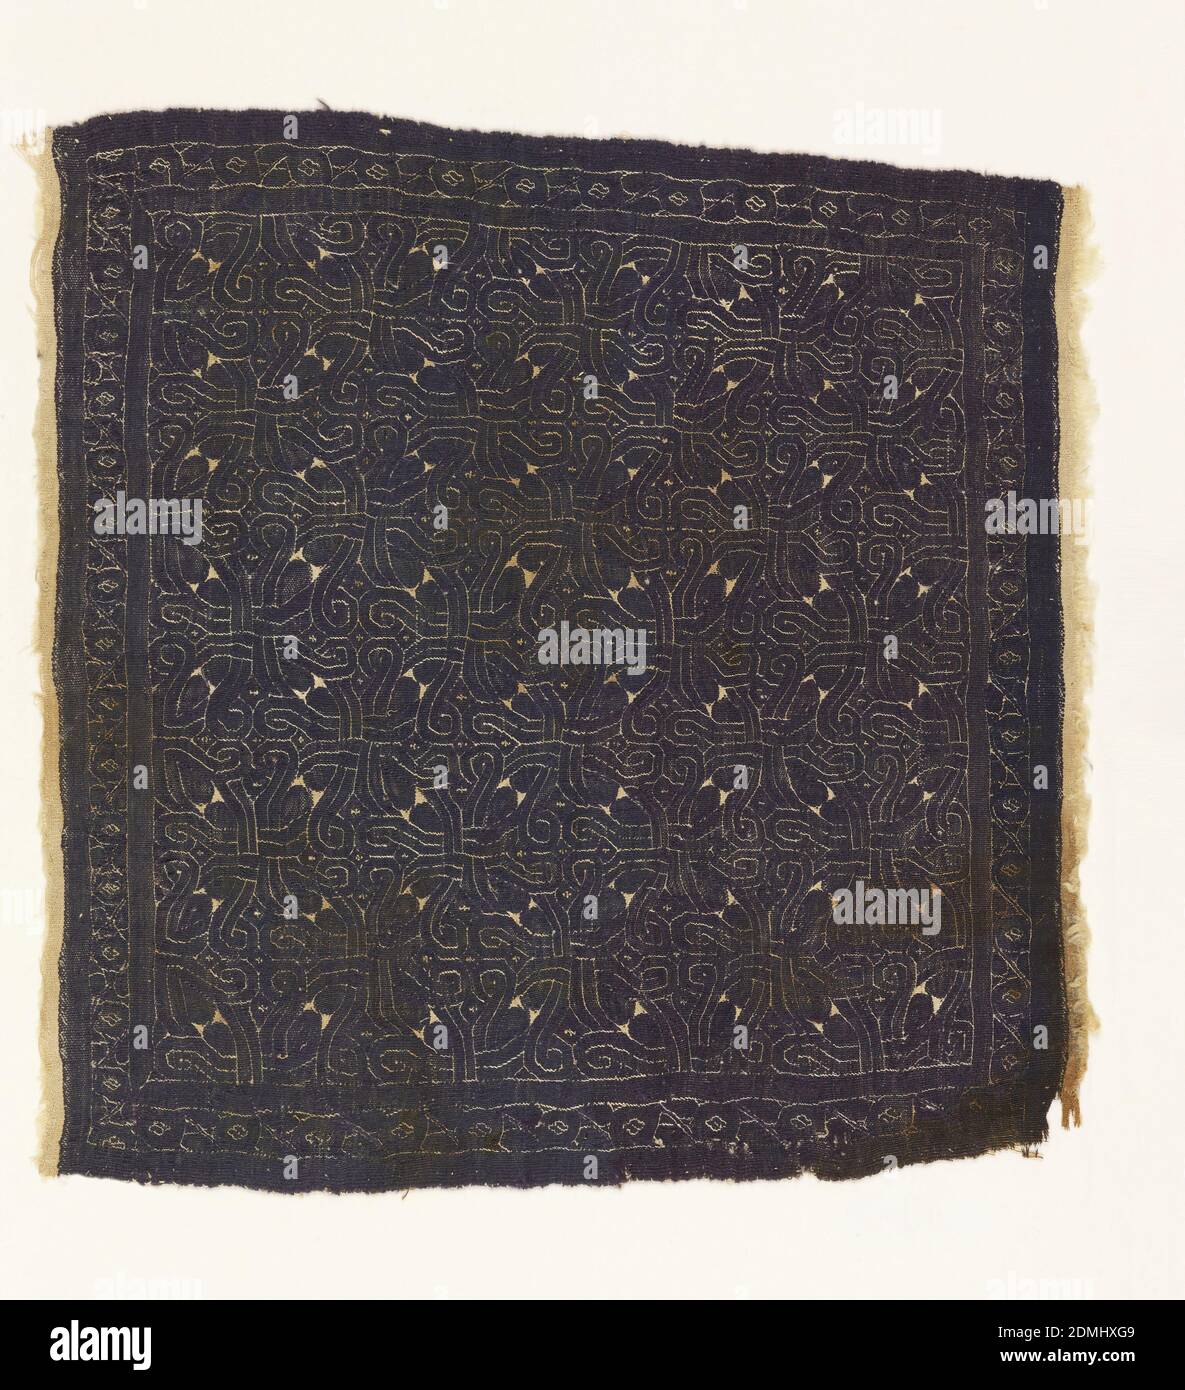 Square, Medium: linen warp, linen and wool wefts Technique: plain weave with discontinuous wefts (tapestry); open slits, supplementary weft wrapping, Square of purple tapestry cut from its linen foundation. Geometric pattern based on interlocking circles., 4th–5th century, woven textiles, Square Stock Photo